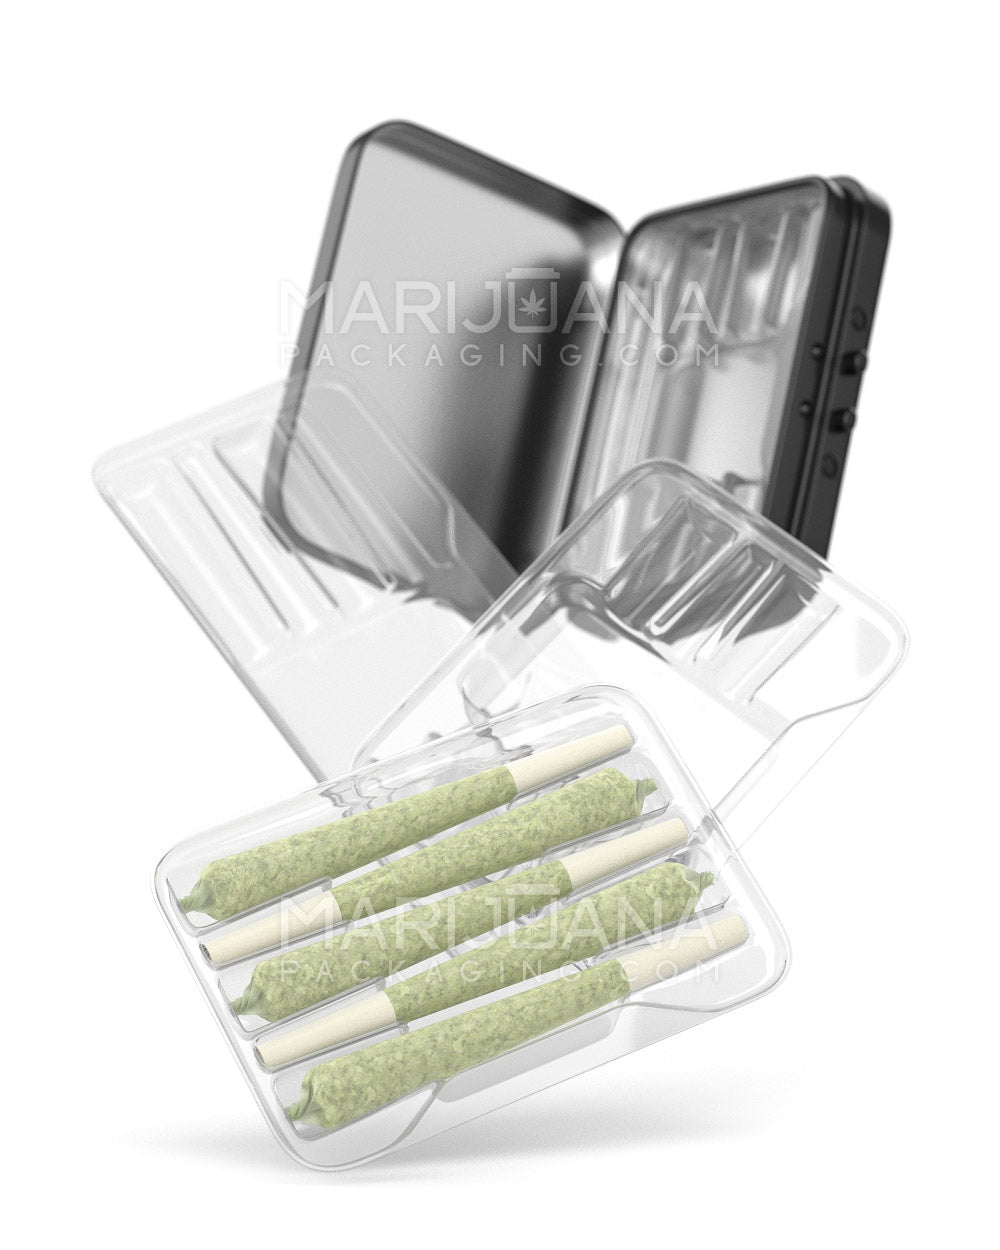 Edible & Joint Box Insert Tray for 3 Mini Pre Rolled Cones | 70mm - Clear Plastic - 100 Count - 9